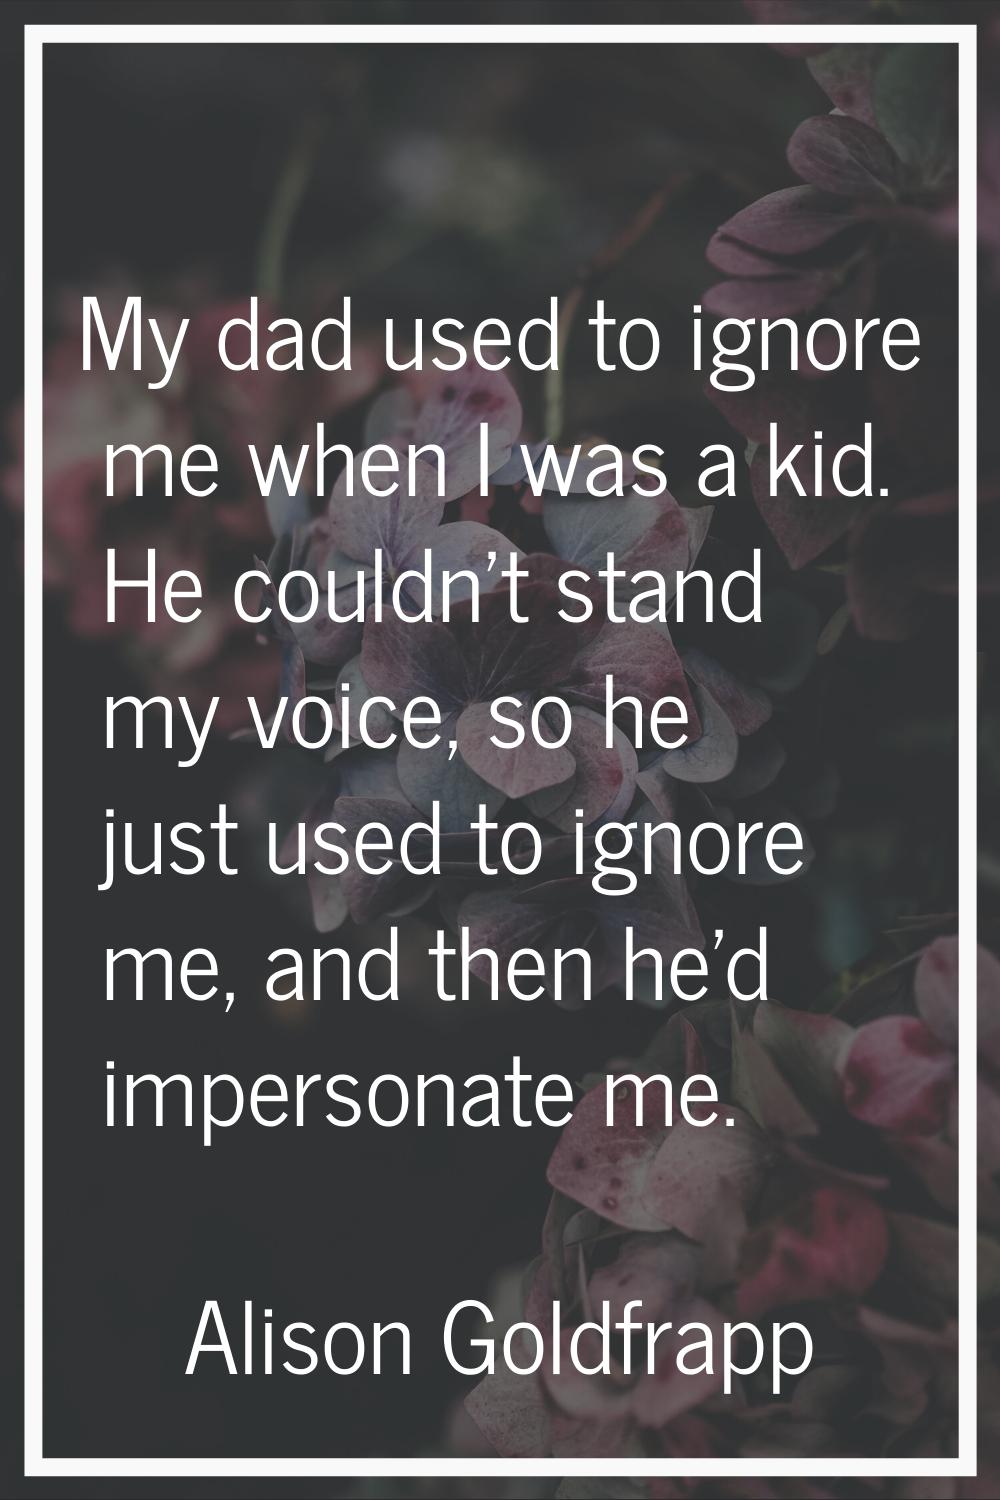 My dad used to ignore me when I was a kid. He couldn't stand my voice, so he just used to ignore me